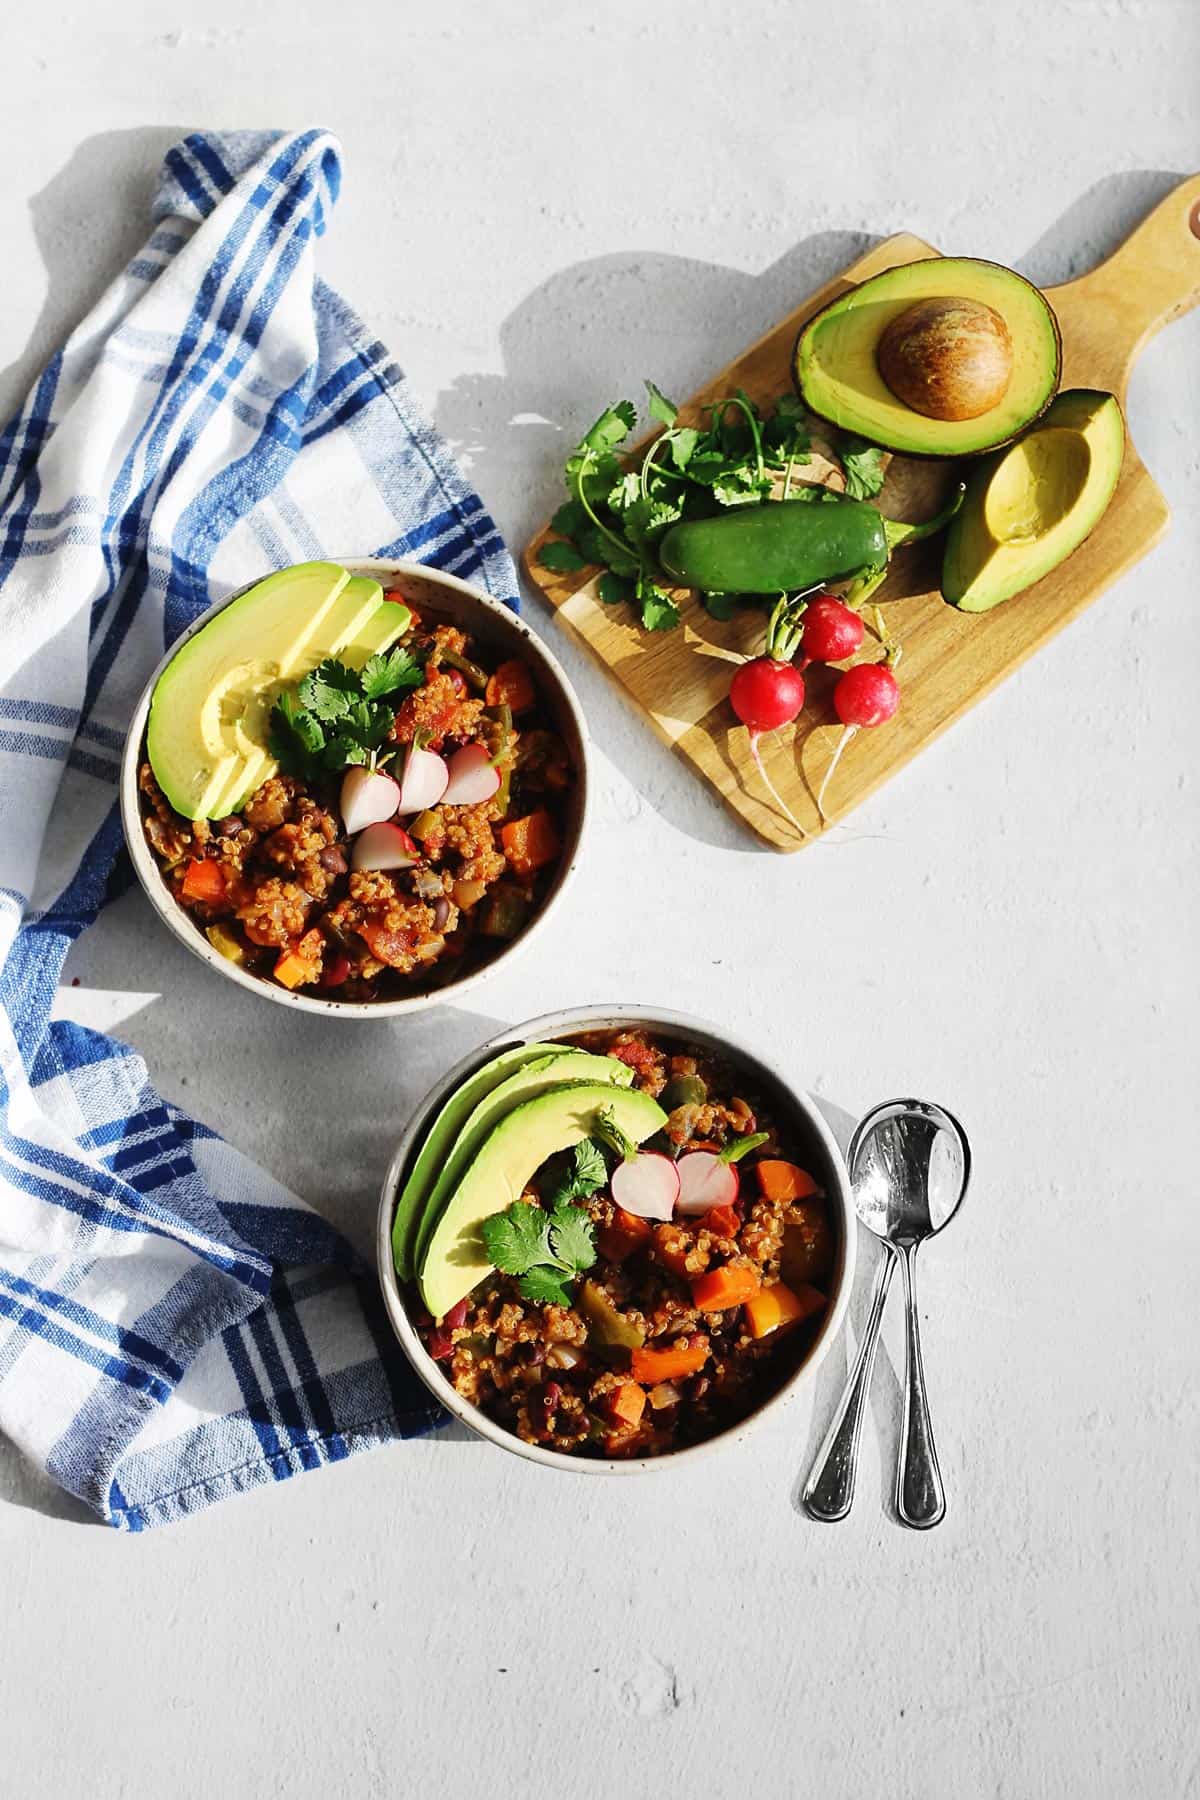 A photo of two bowls of vegetarian chili with quinoa and avocado slices on top.